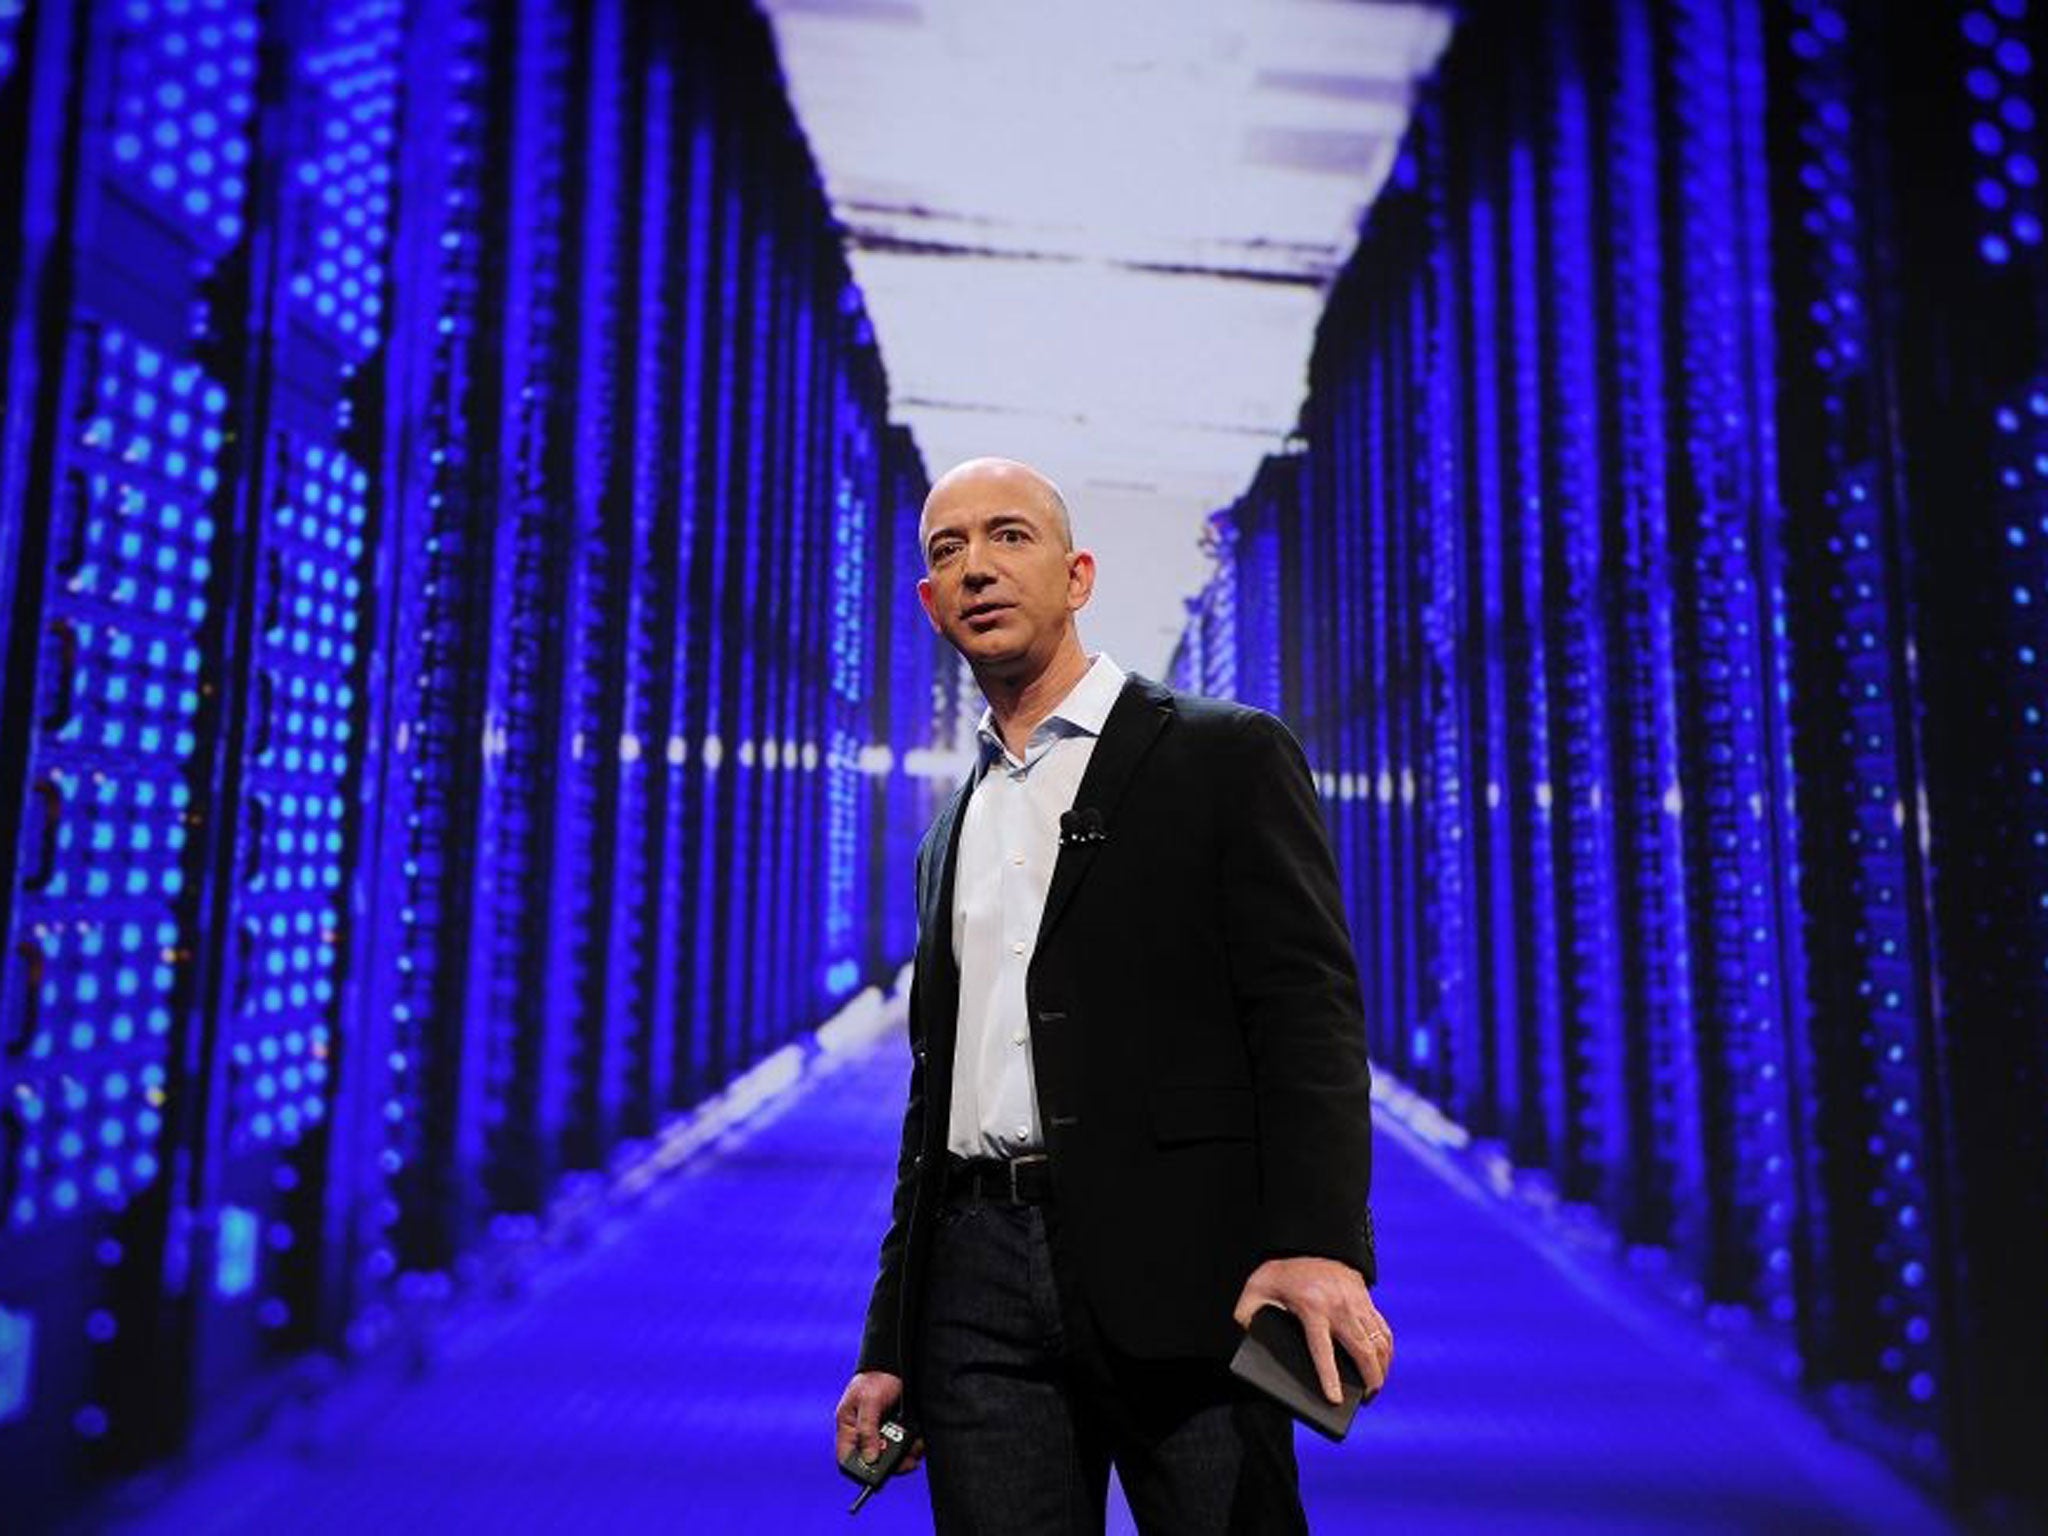 Amazon founder Jeff Bezos committed the company to creating an economy for all.